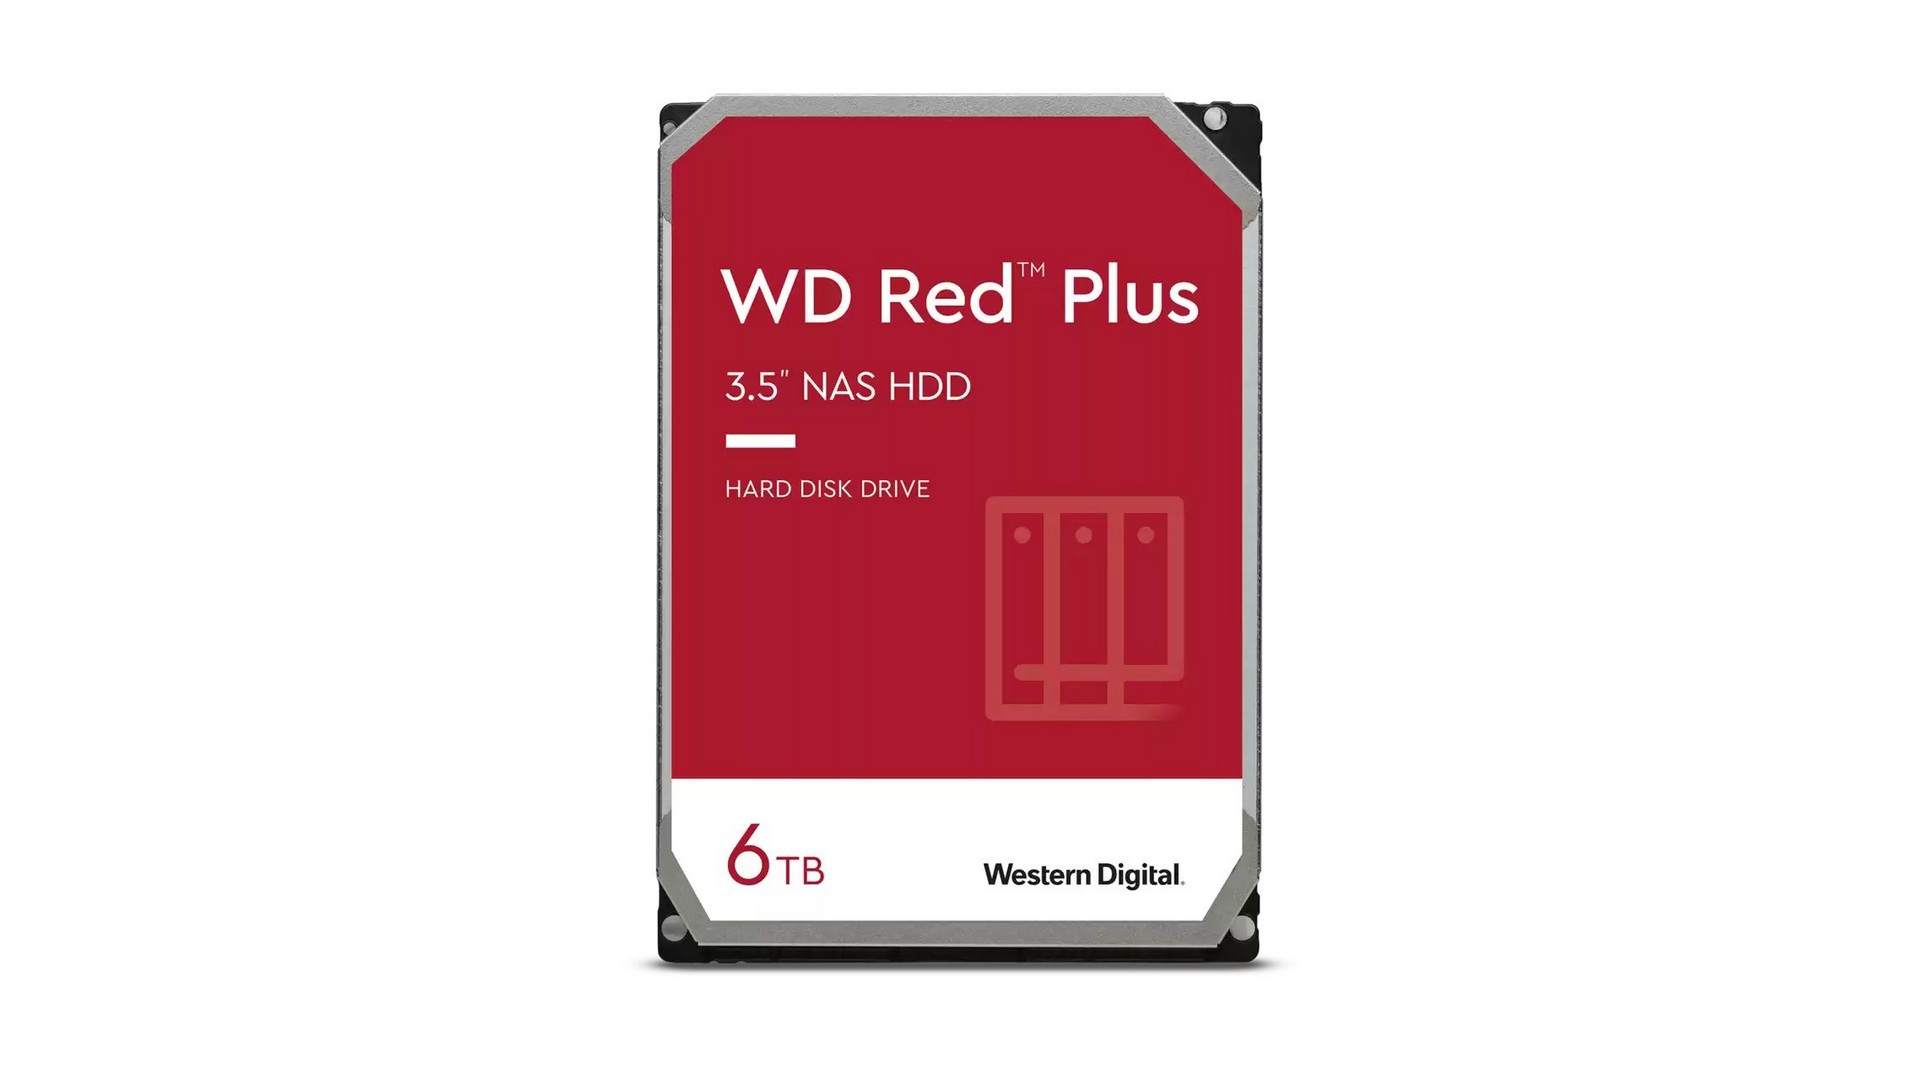 Ổ Cứng HDD WD Red Plus 6TB (3.5" | 5400RPM | 256MB Cache | WD60EFPX)